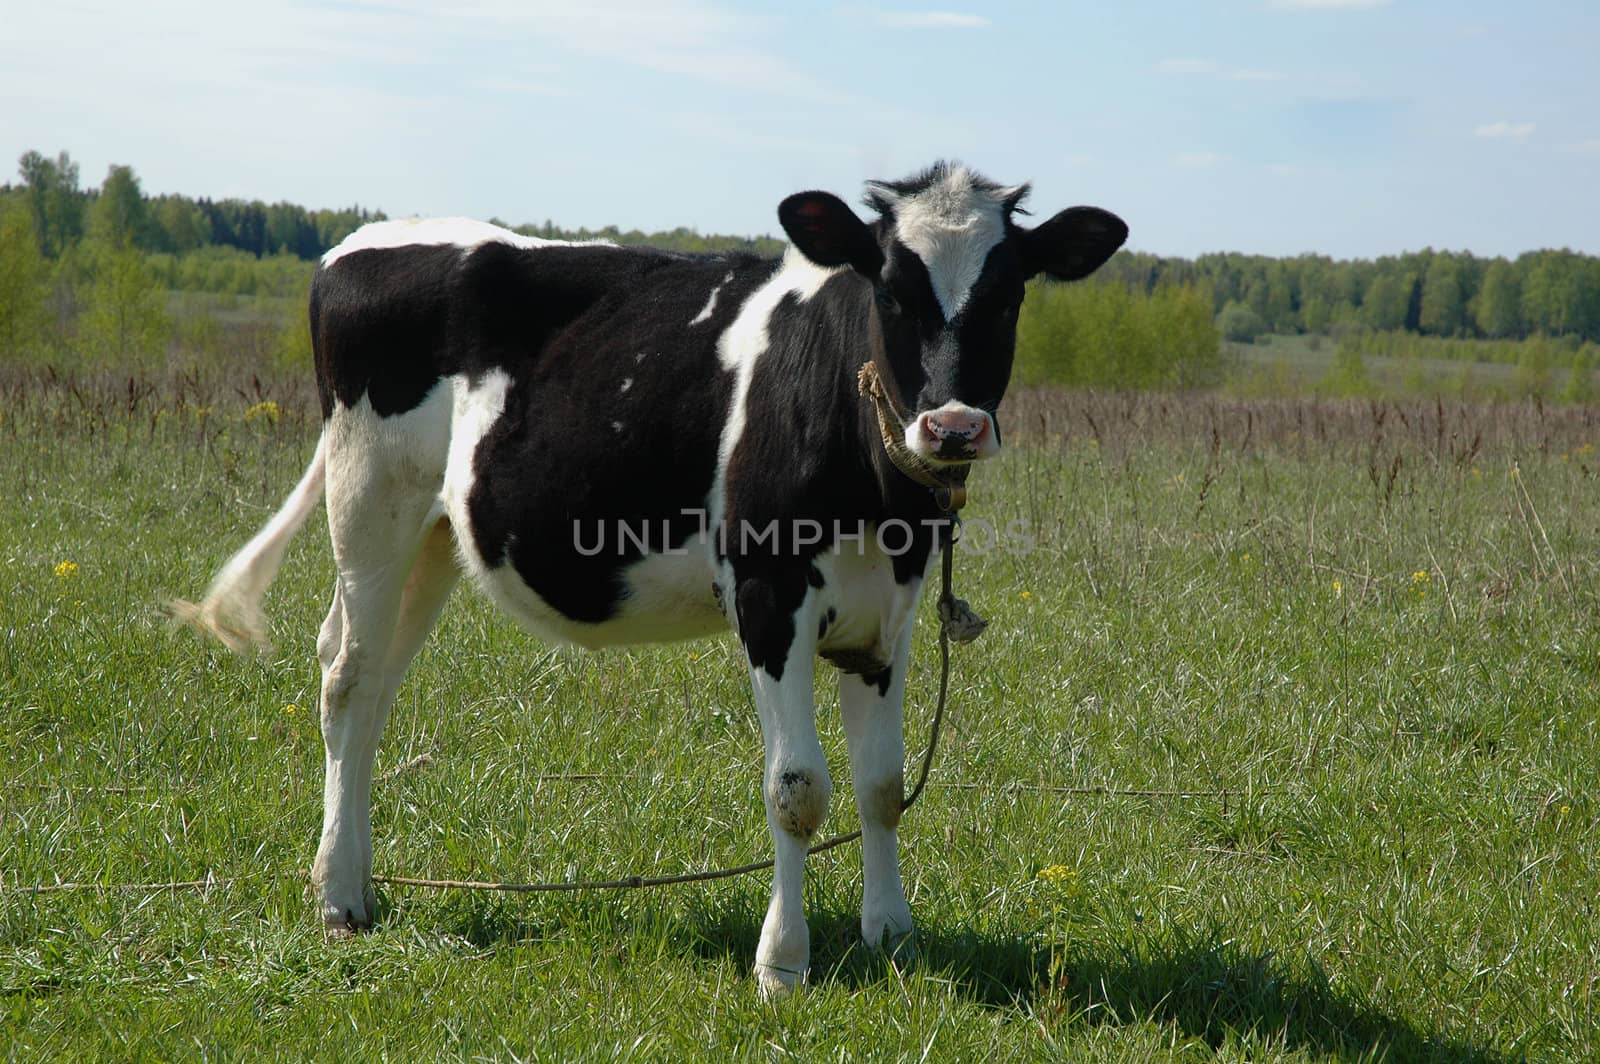 blask and white calf in field  by OlgaDrozd